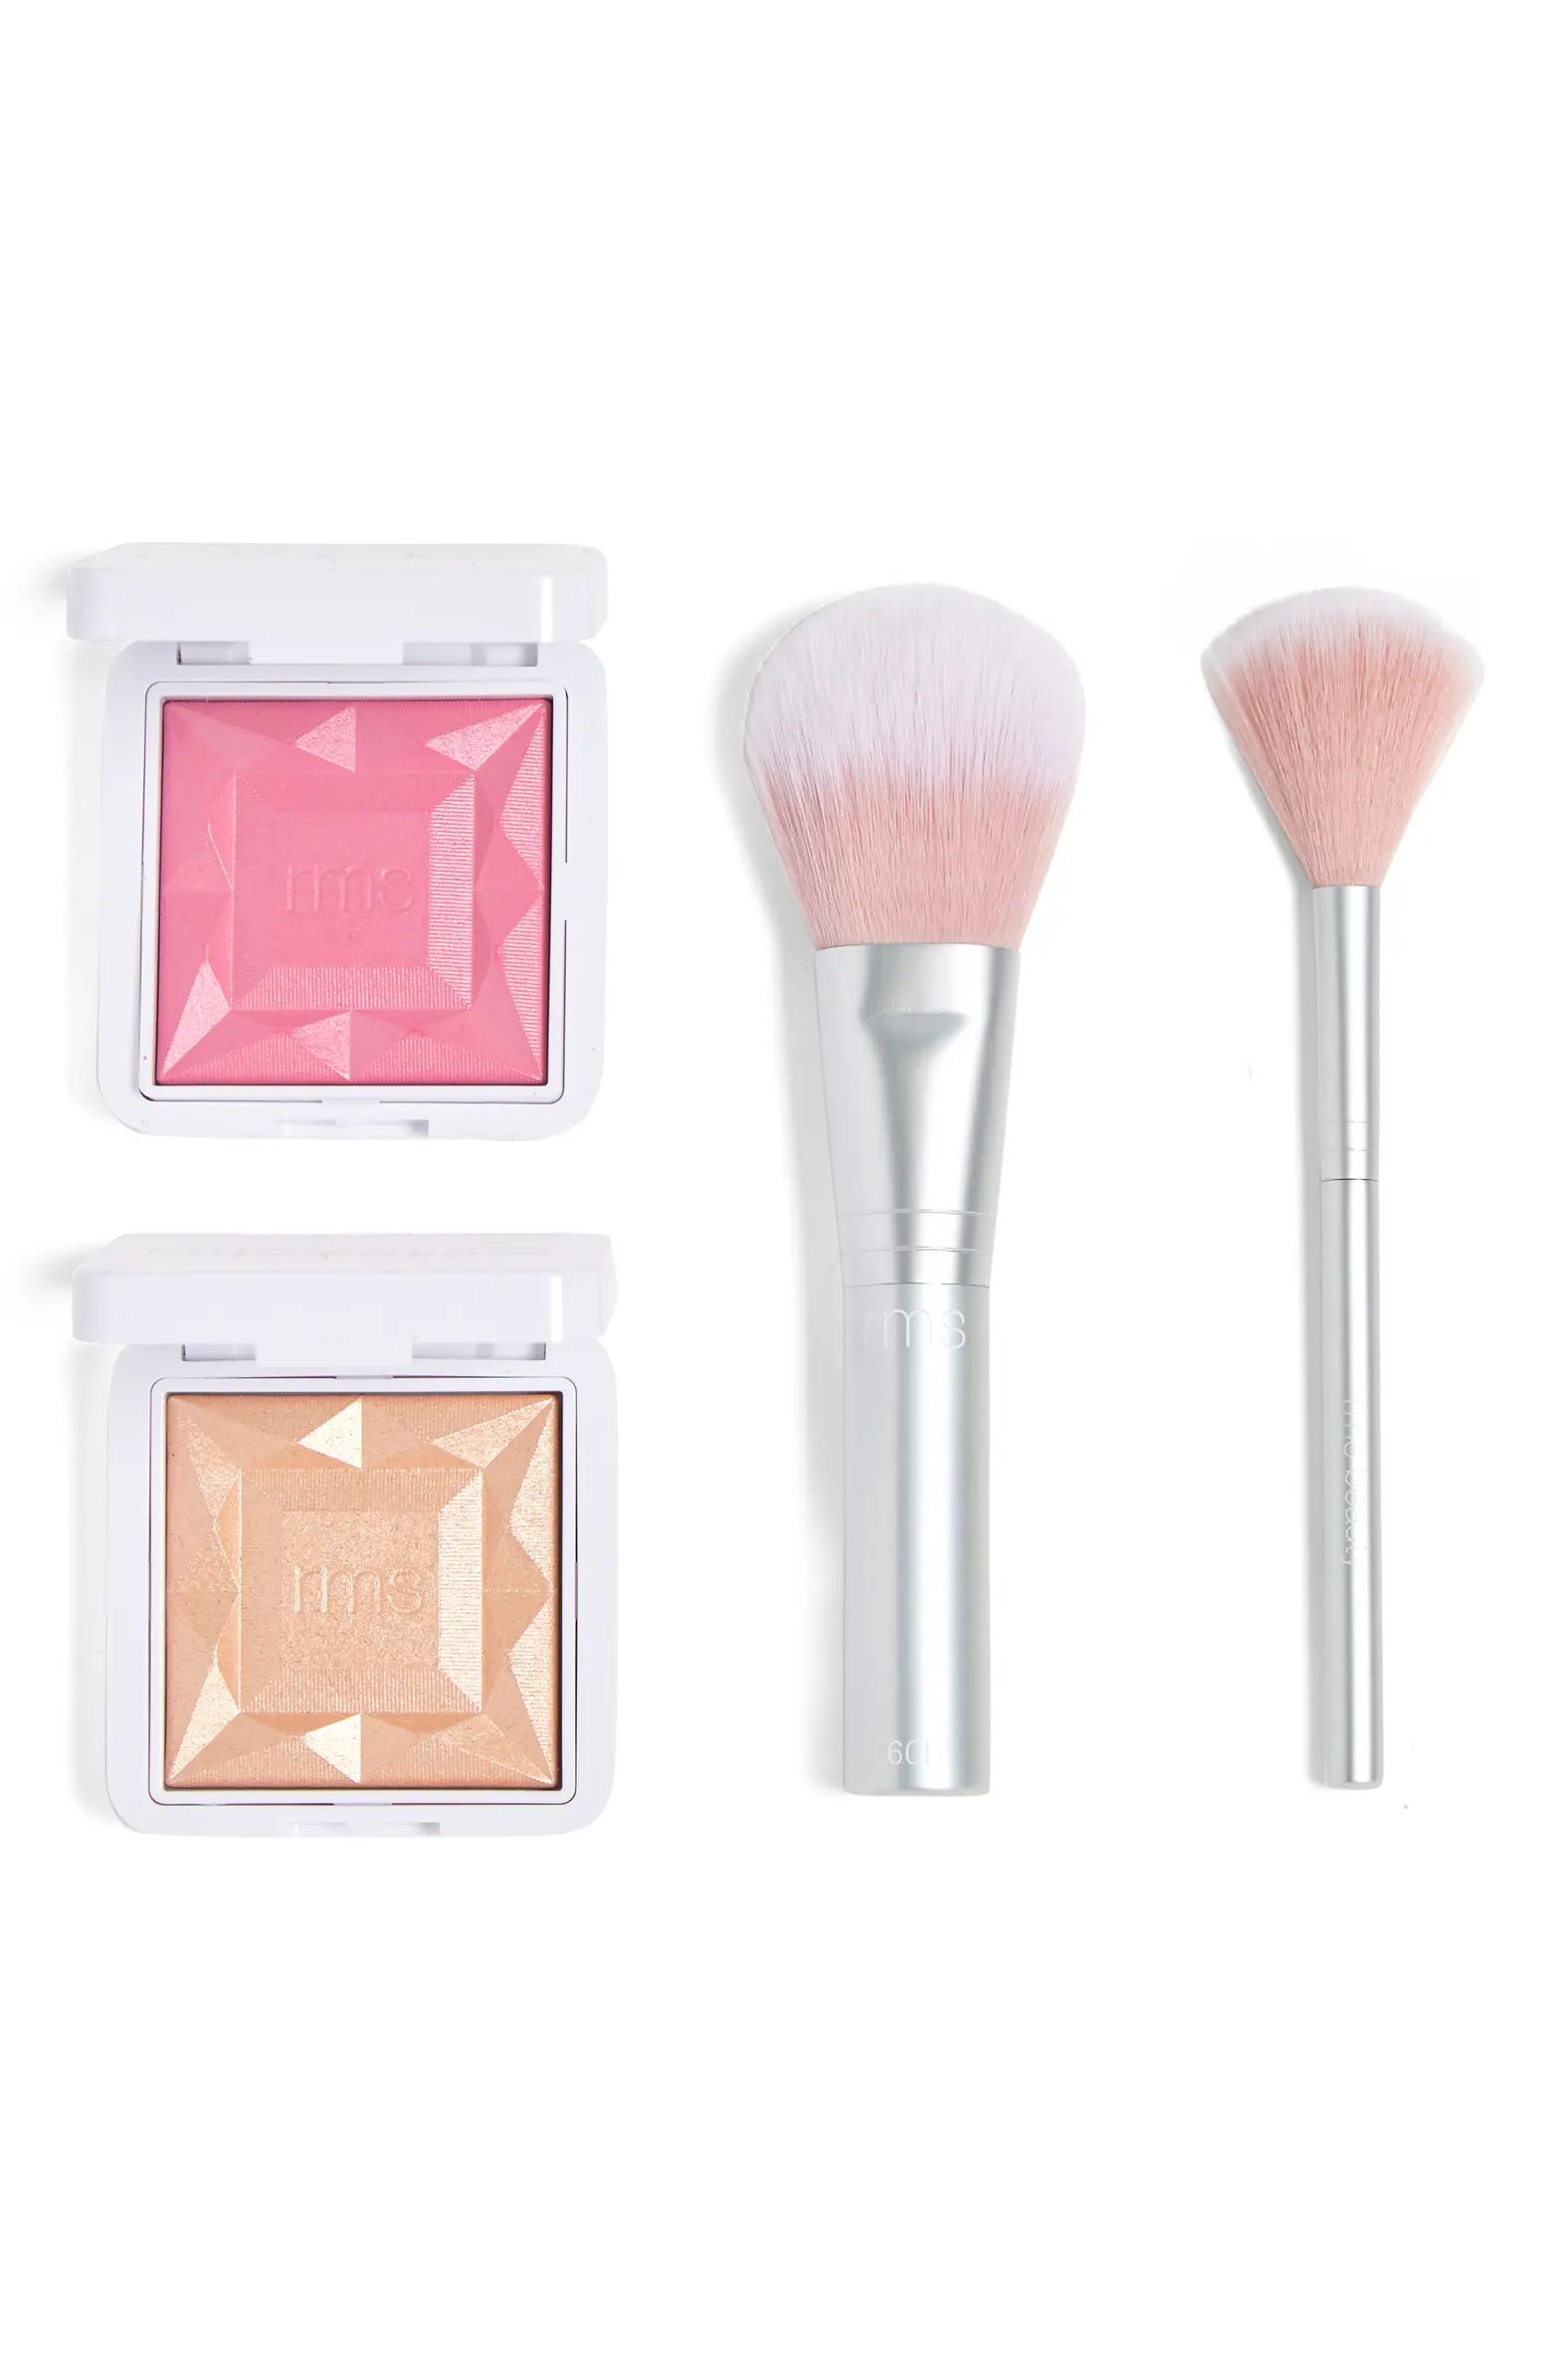 Deluxe Glow Kit (Limited Edition) $141 Value | Nordstrom